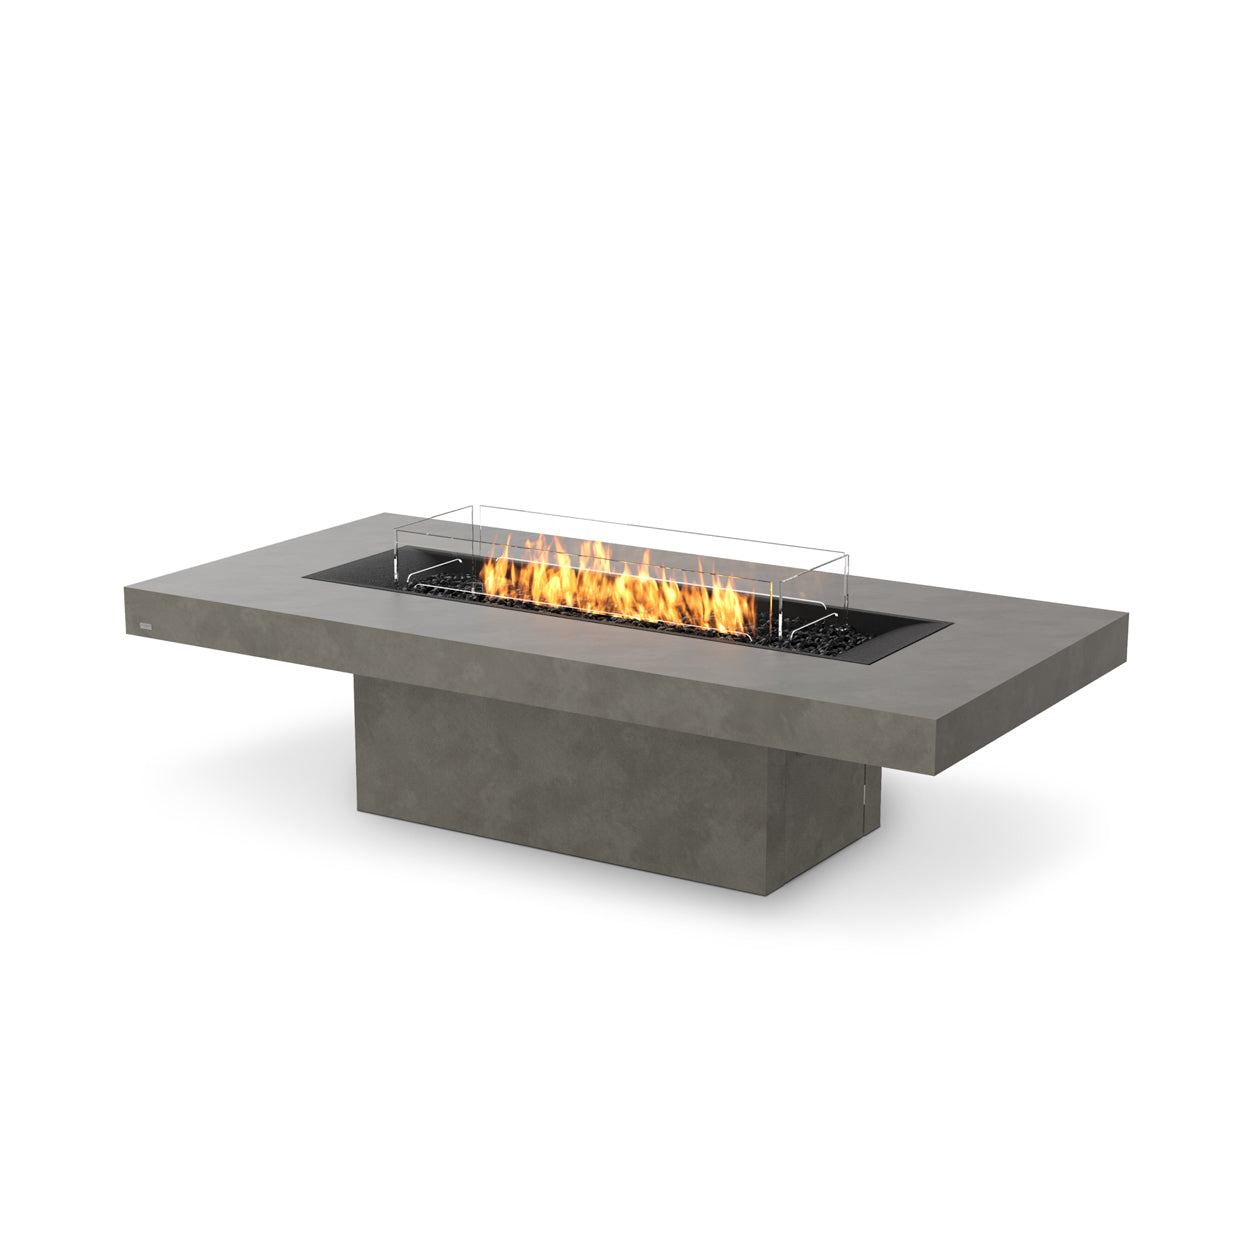 GIN 90 (CHAT) FIRE PIT TABLE - NATURAL GAS / LIQUID PROPANE